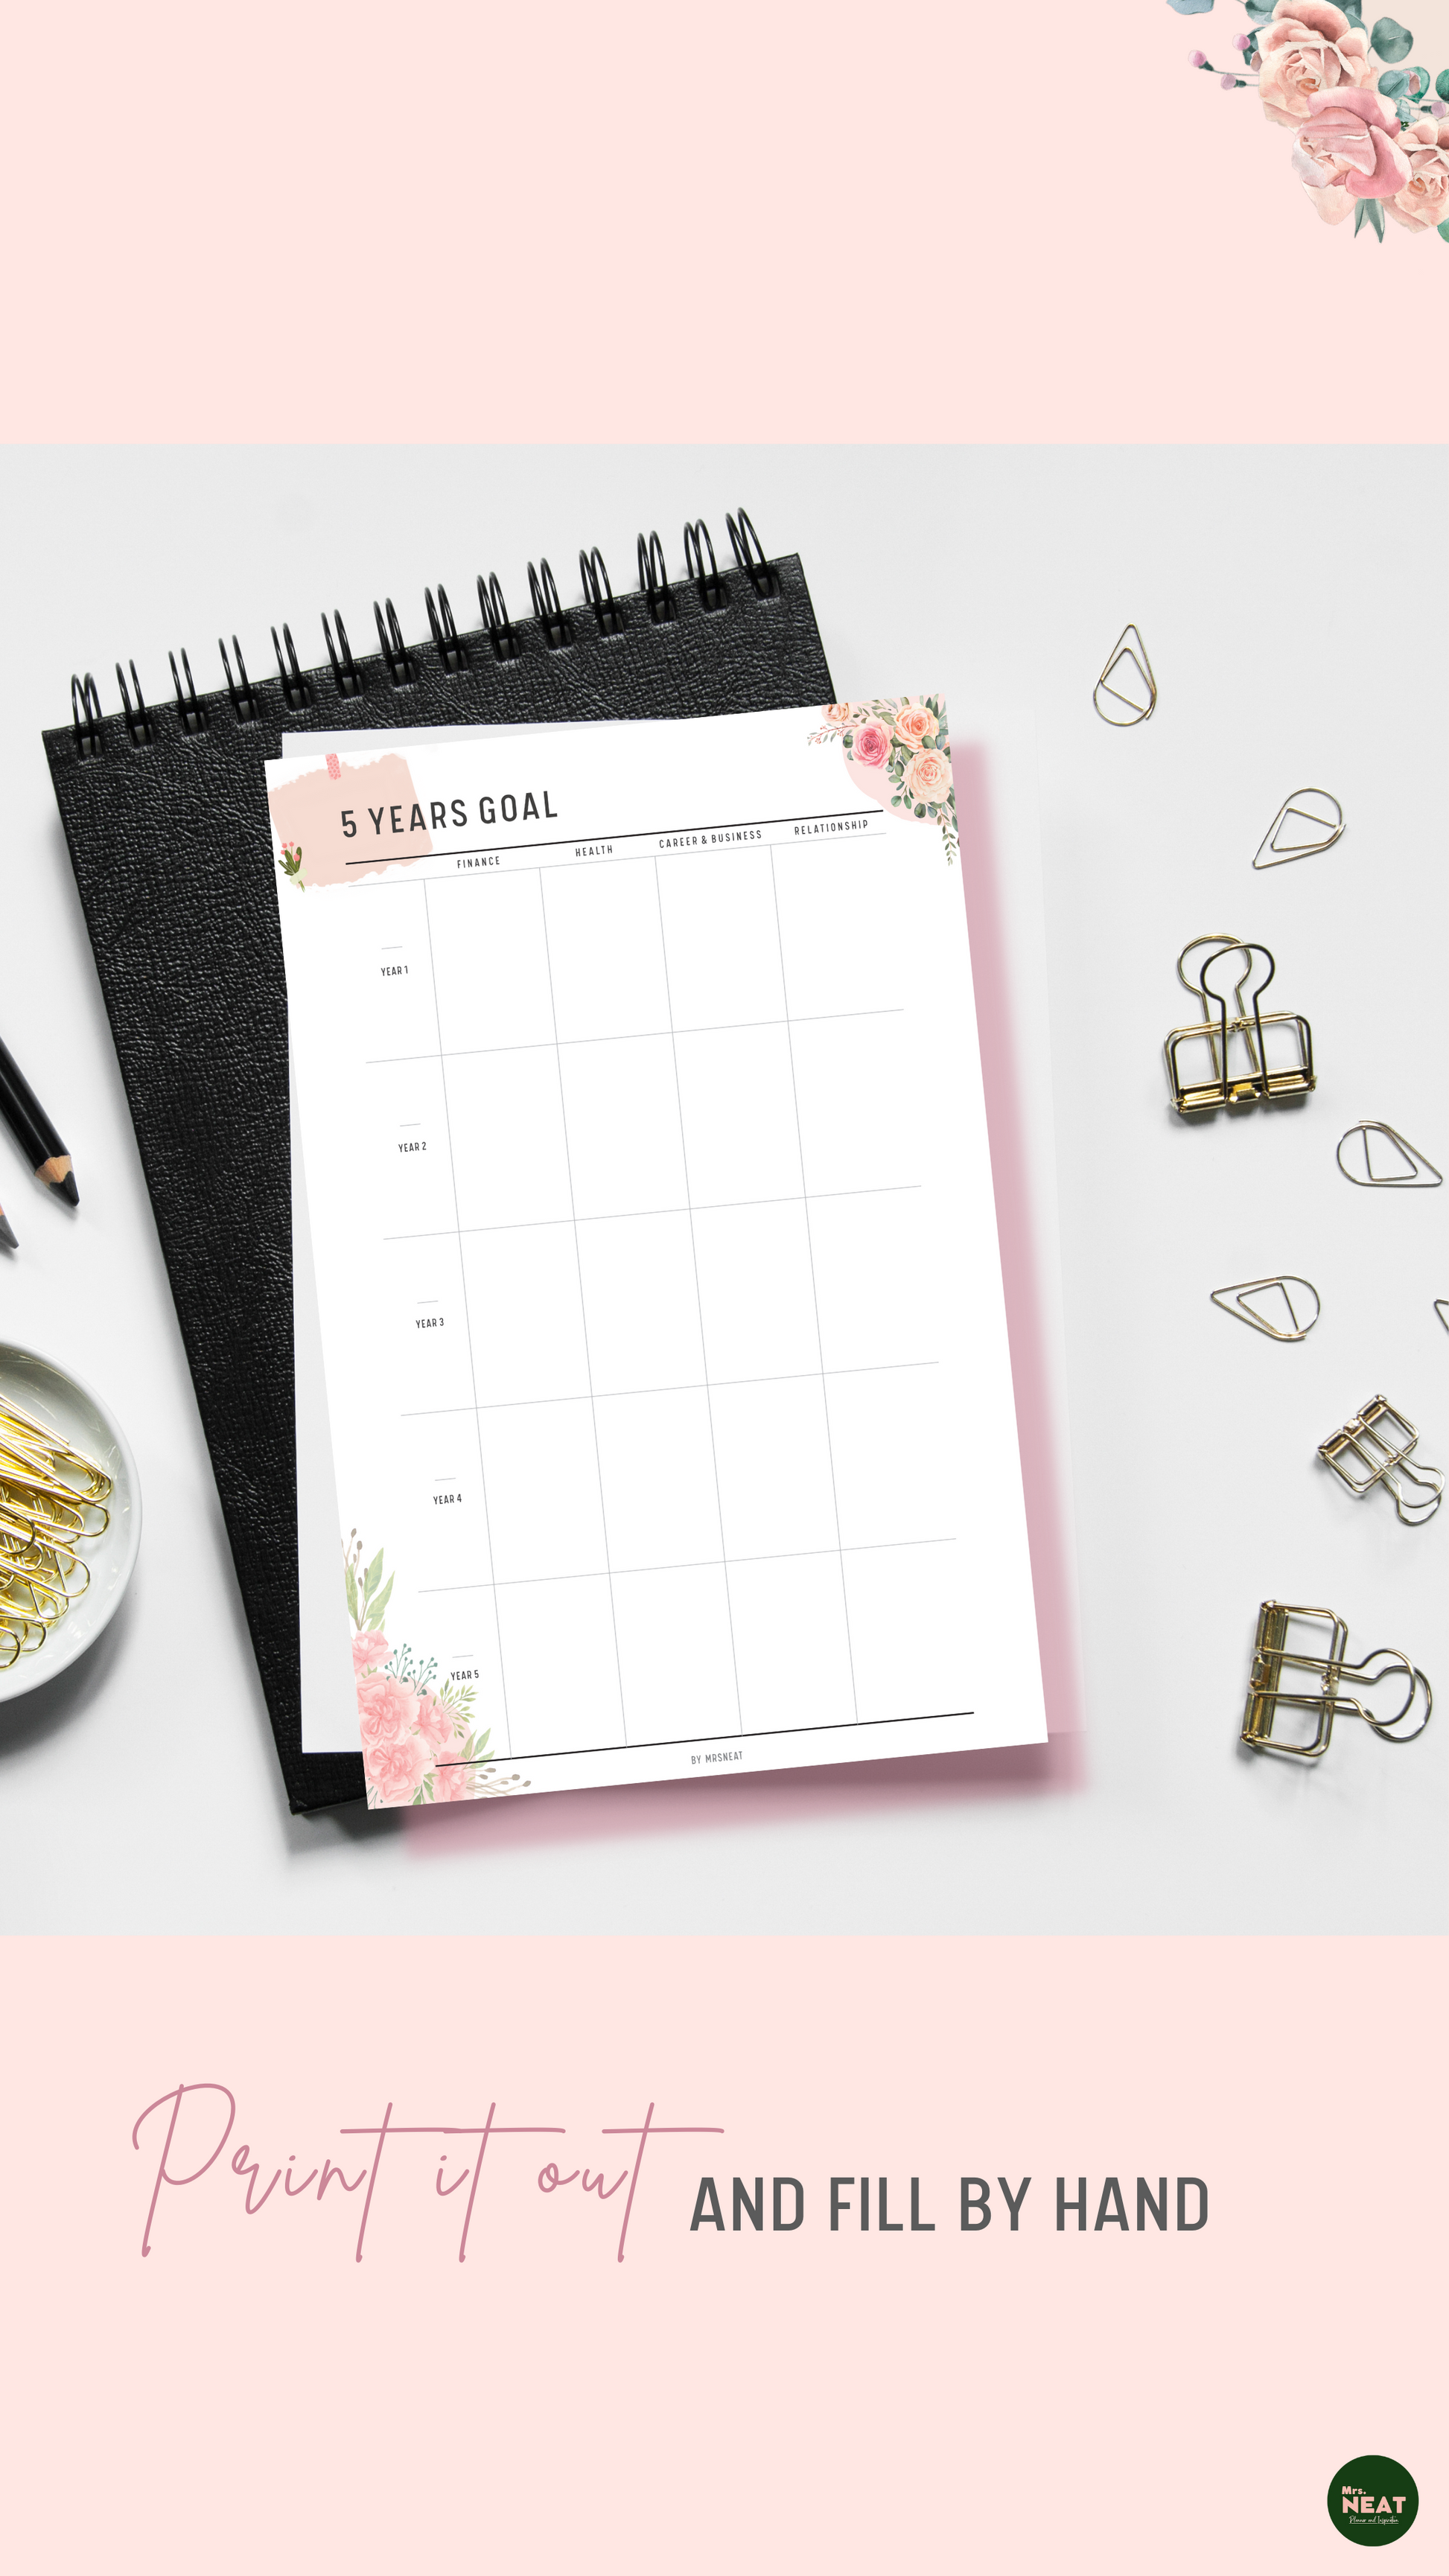 Floral 5 Year Goal Planner Printable Printed out and put on the black book with stationery surround